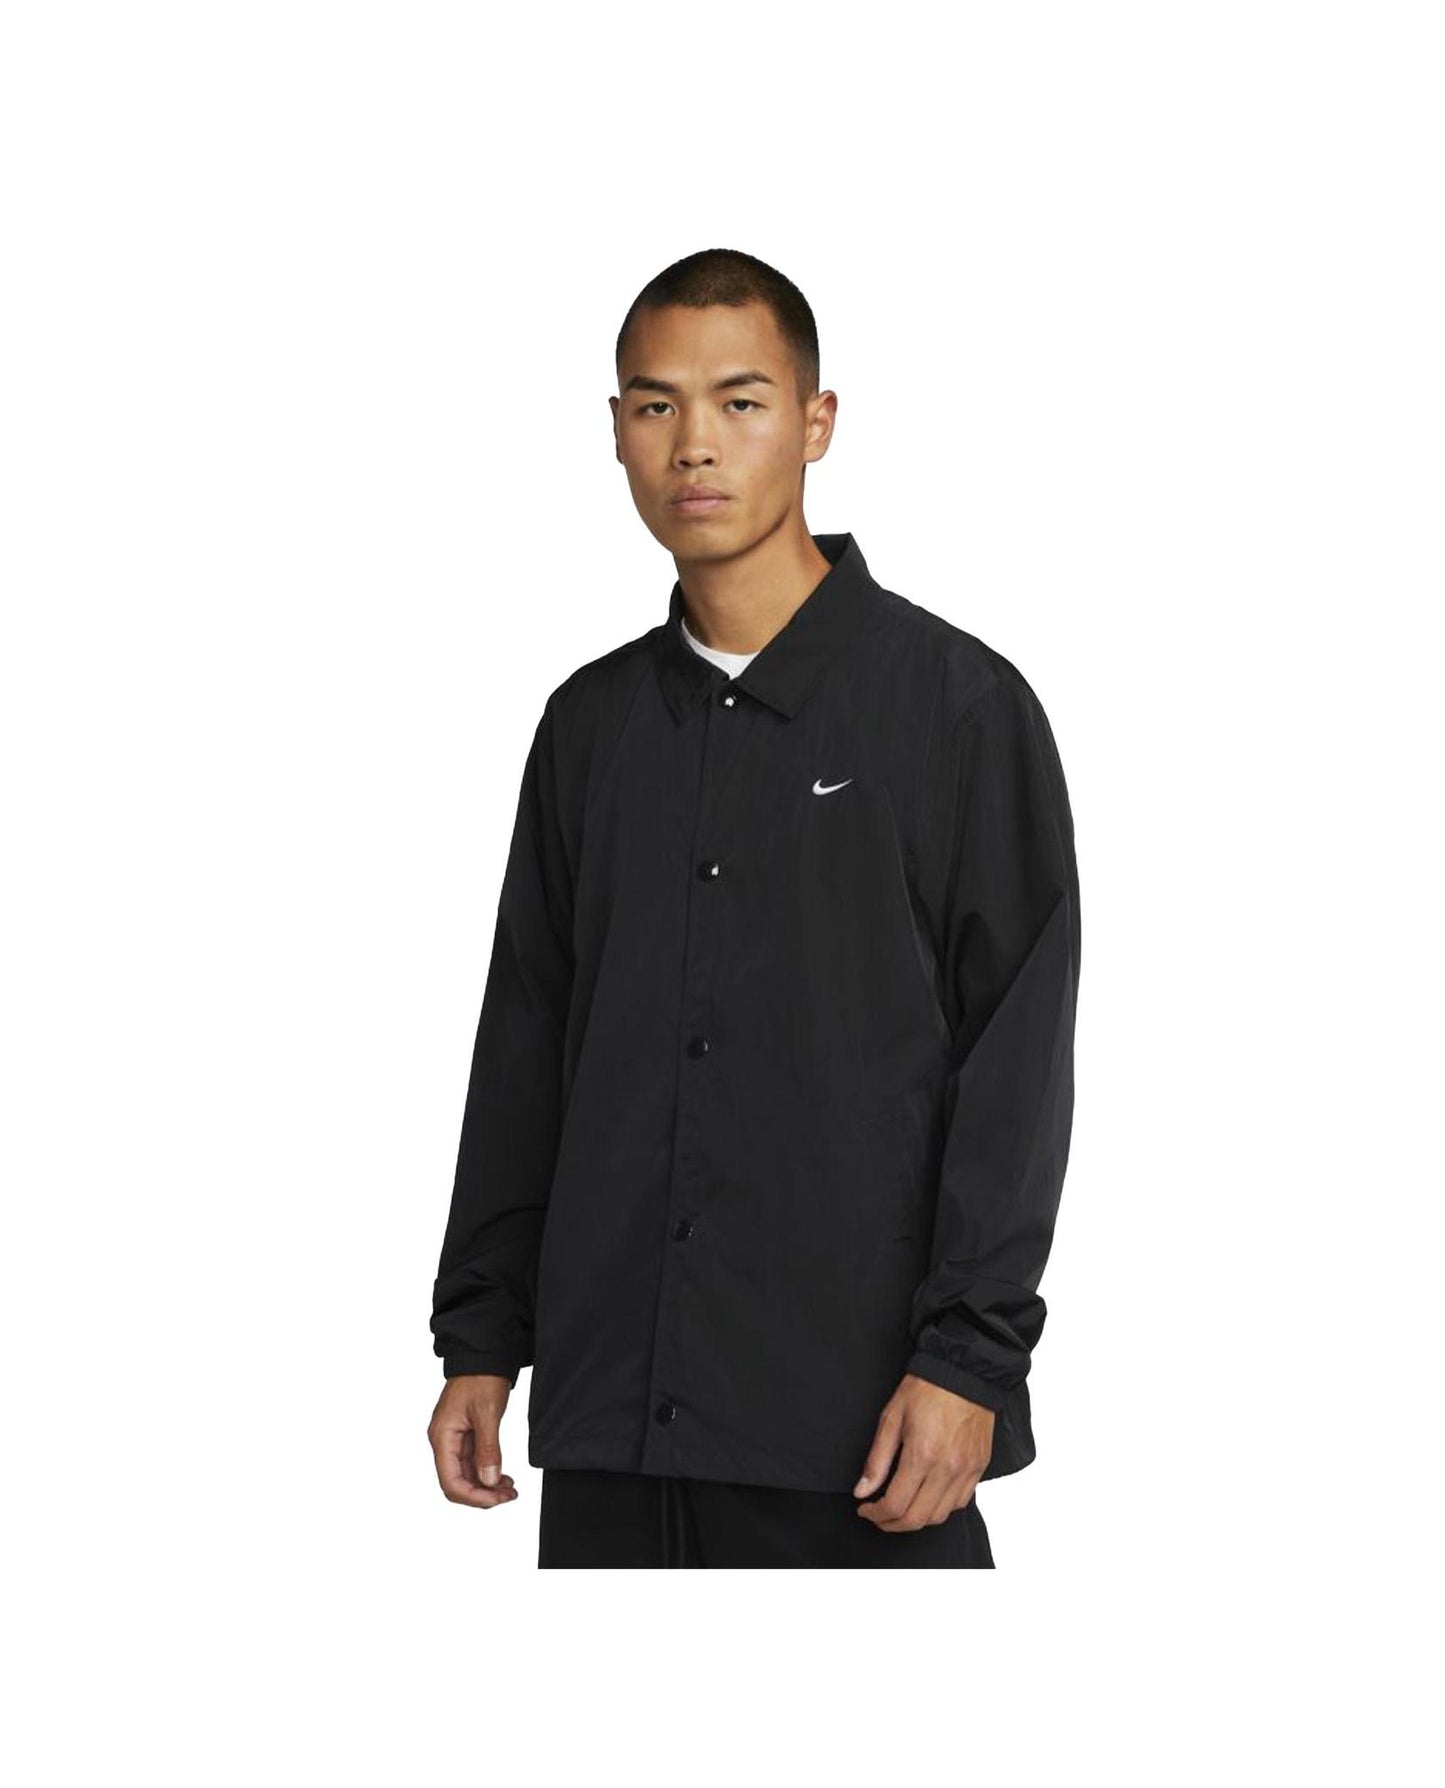 Lydighed velstand Human Nike Sportswear Authentics Men's Coaches Jacket | STASHED